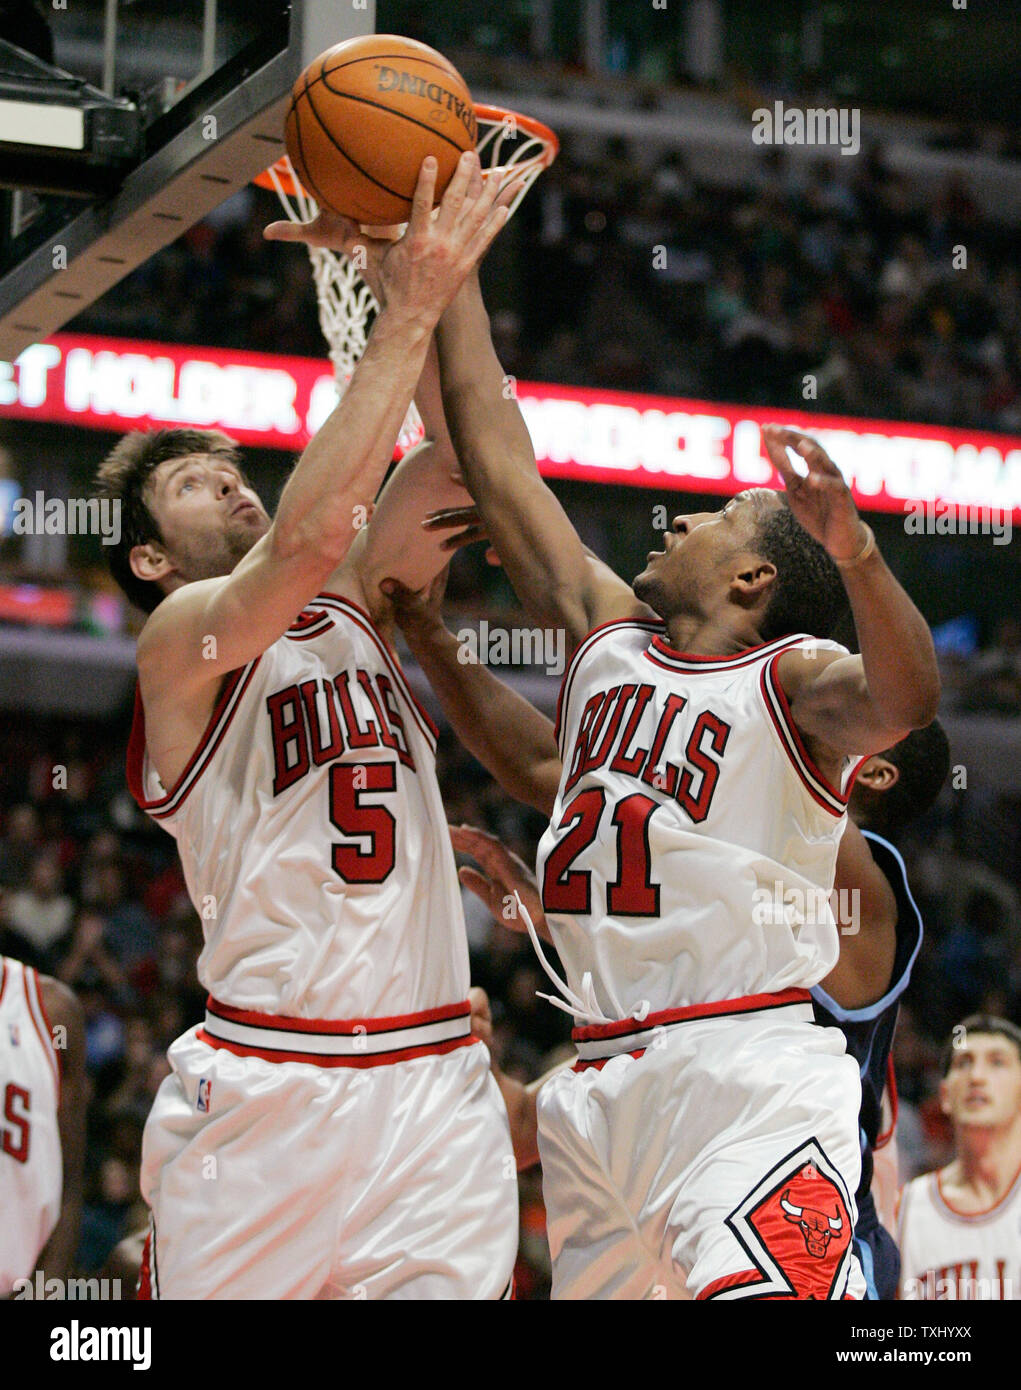 Chicago Bulls' Andres Nocioni (5), of Argentina, and Chris Duhon (21) go for a rebound during the fourth quarter against the Utah Jazz, November 12, 2005, in Chicago. The Bulls won 103-98. (UPI Photo/Brian Kersey) Stock Photo